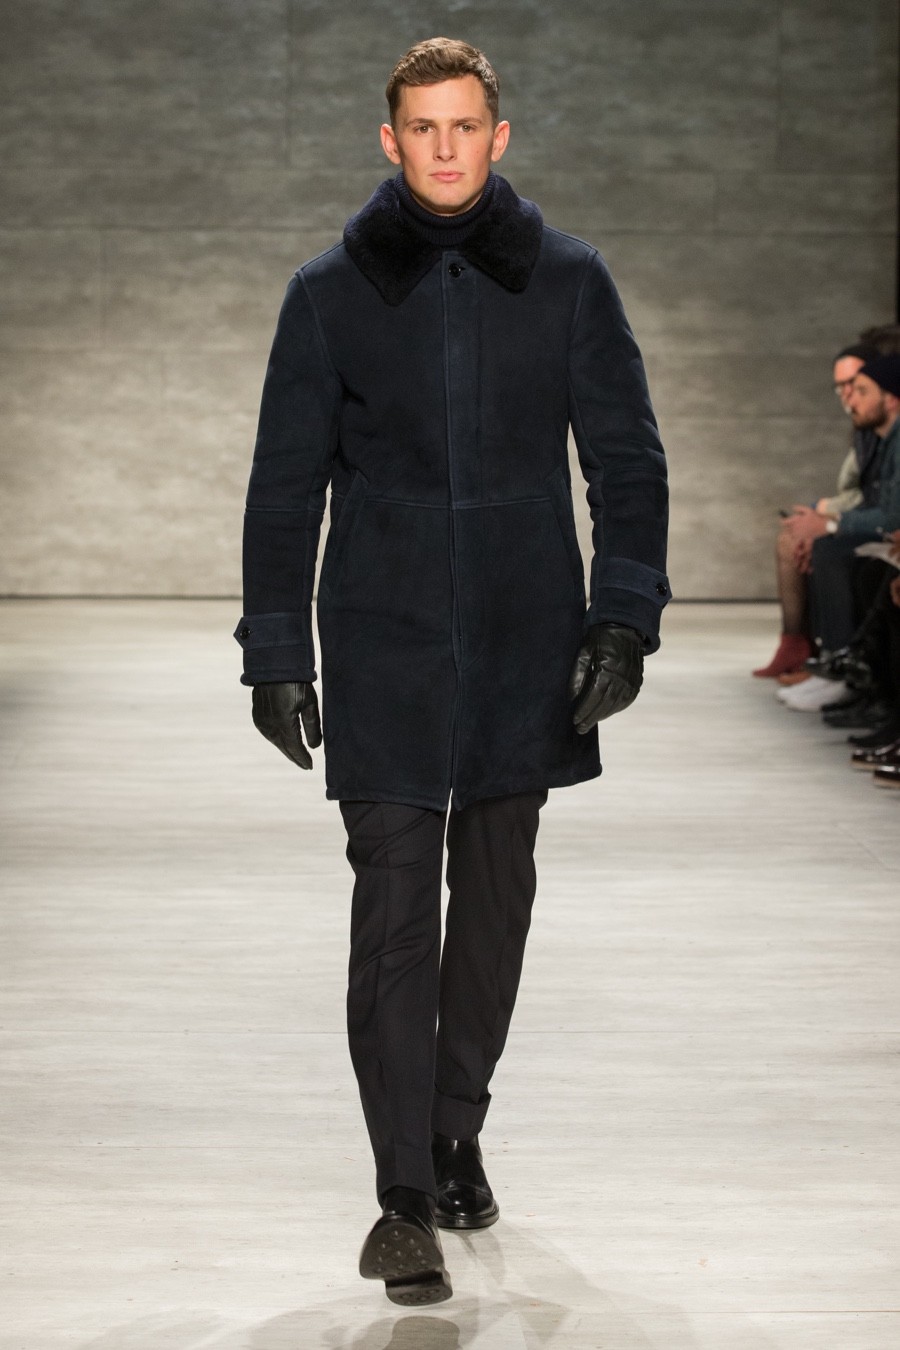 Todd Snyder Fall Winter 2015 Menswear Collection 023